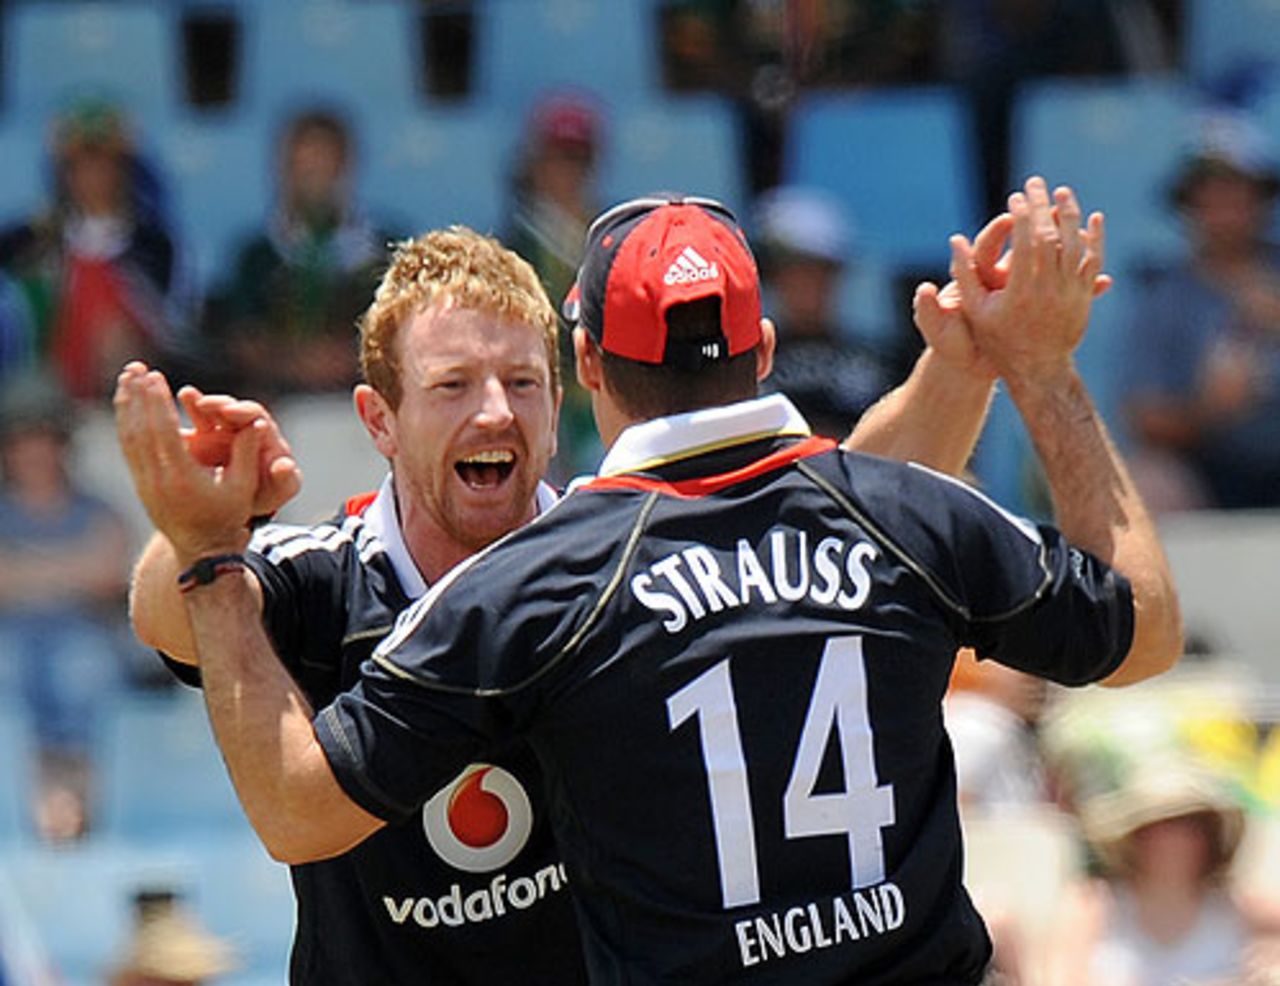 Paul Collingwood was the pick of England's bowlers on a day for the medium-pacers, South Africa v England, 2nd ODI, Centurion, November 22, 2009